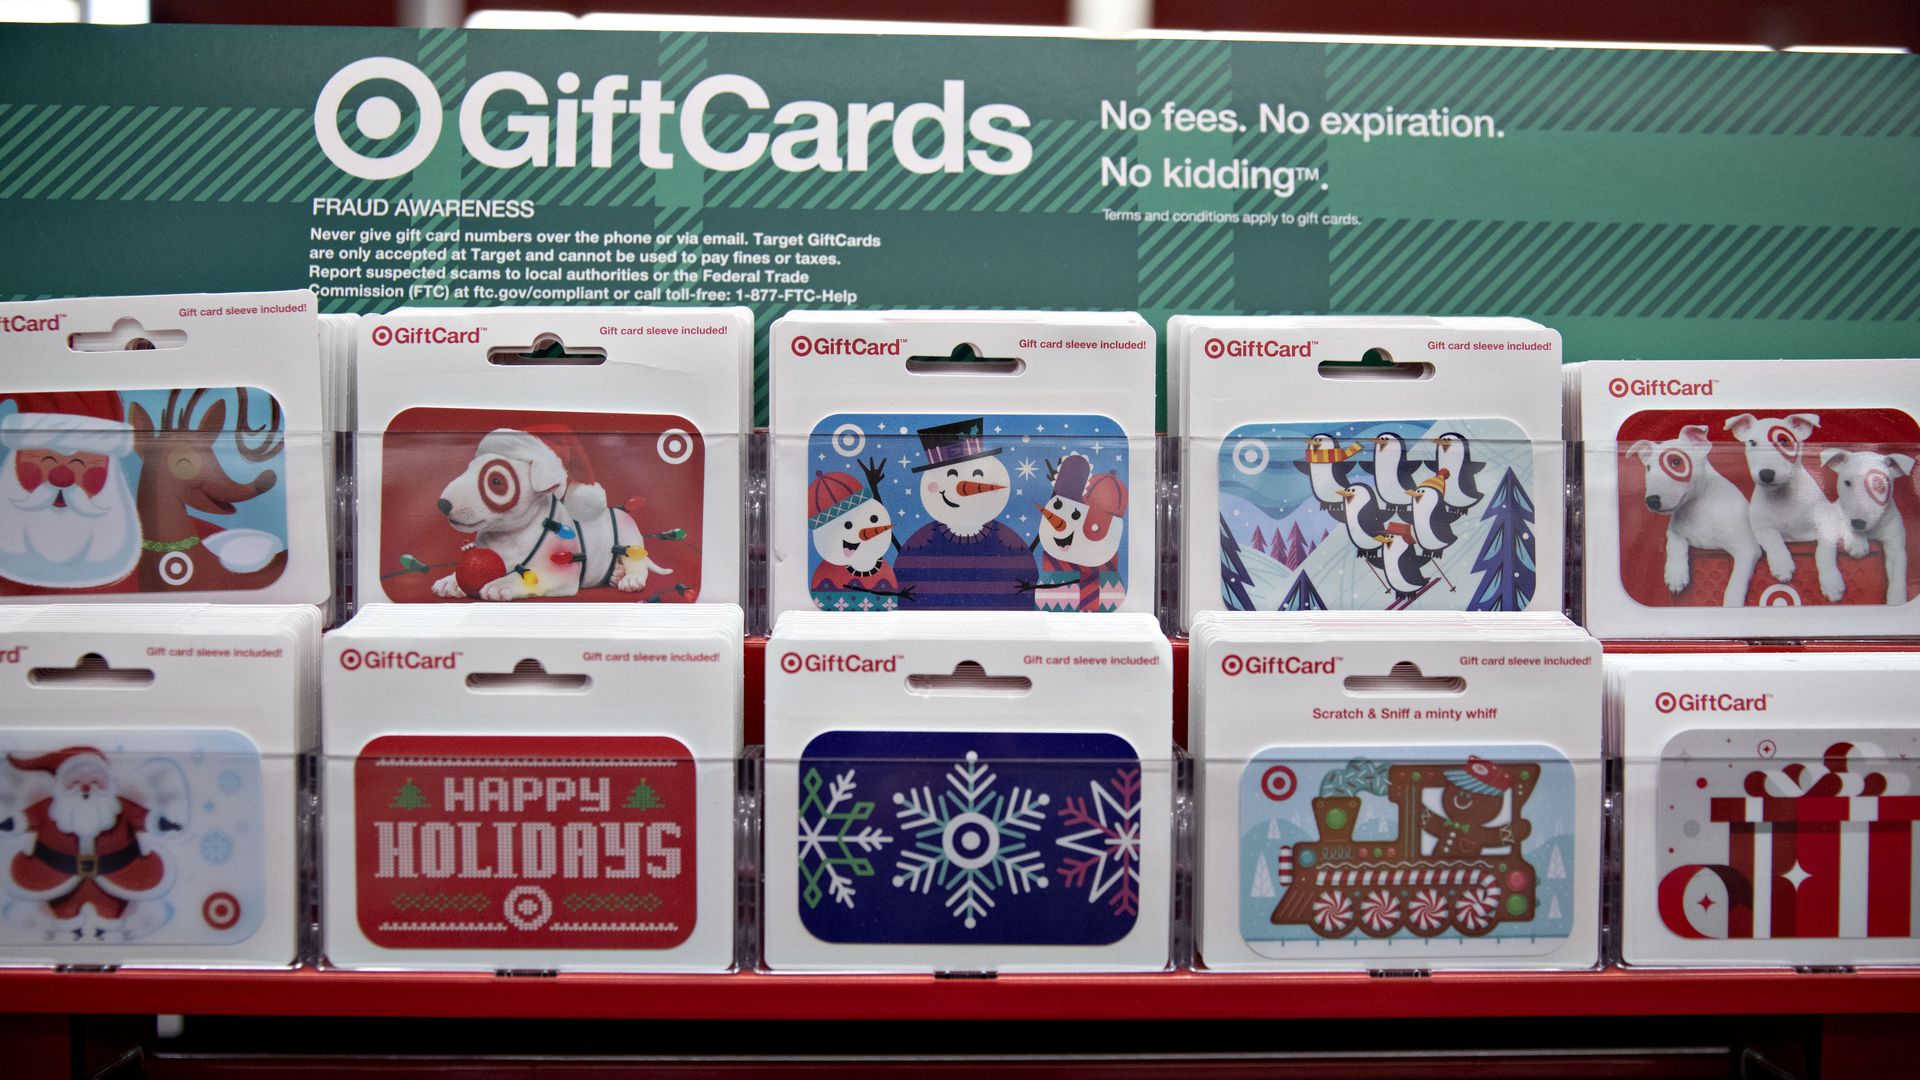 🎯 $50 Off $50 for New REDcard Holders + 10% Off Gift Cards! Sign